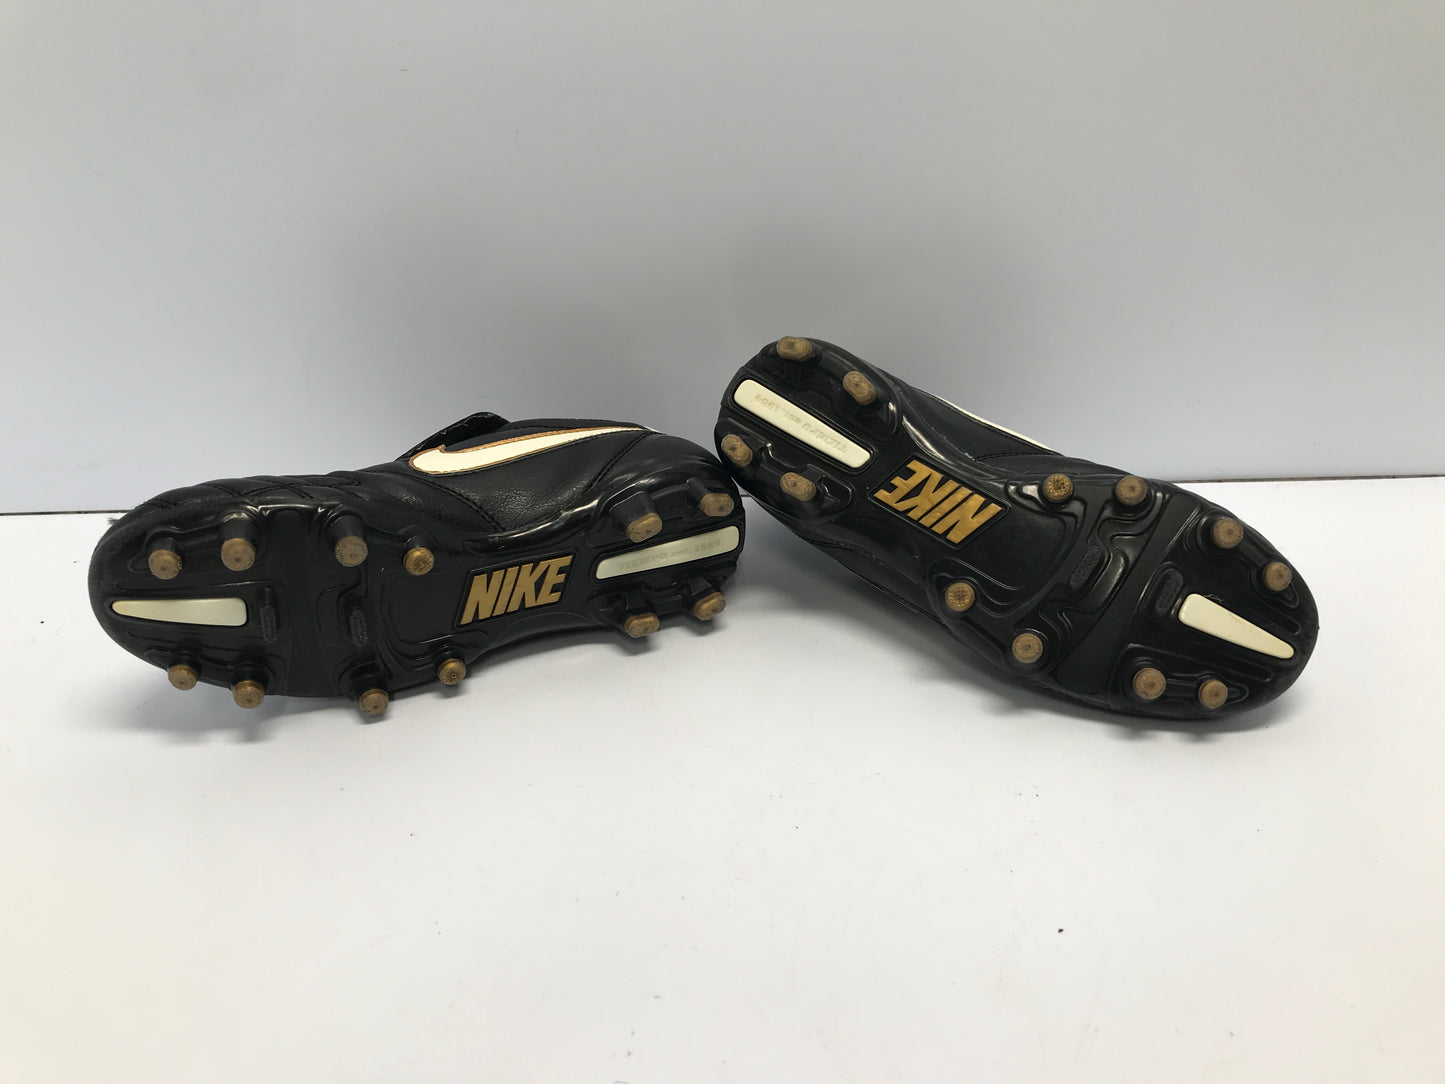 Soccer Shoes Cleats Child Size 1.5 Nike Tiempo Black Gold